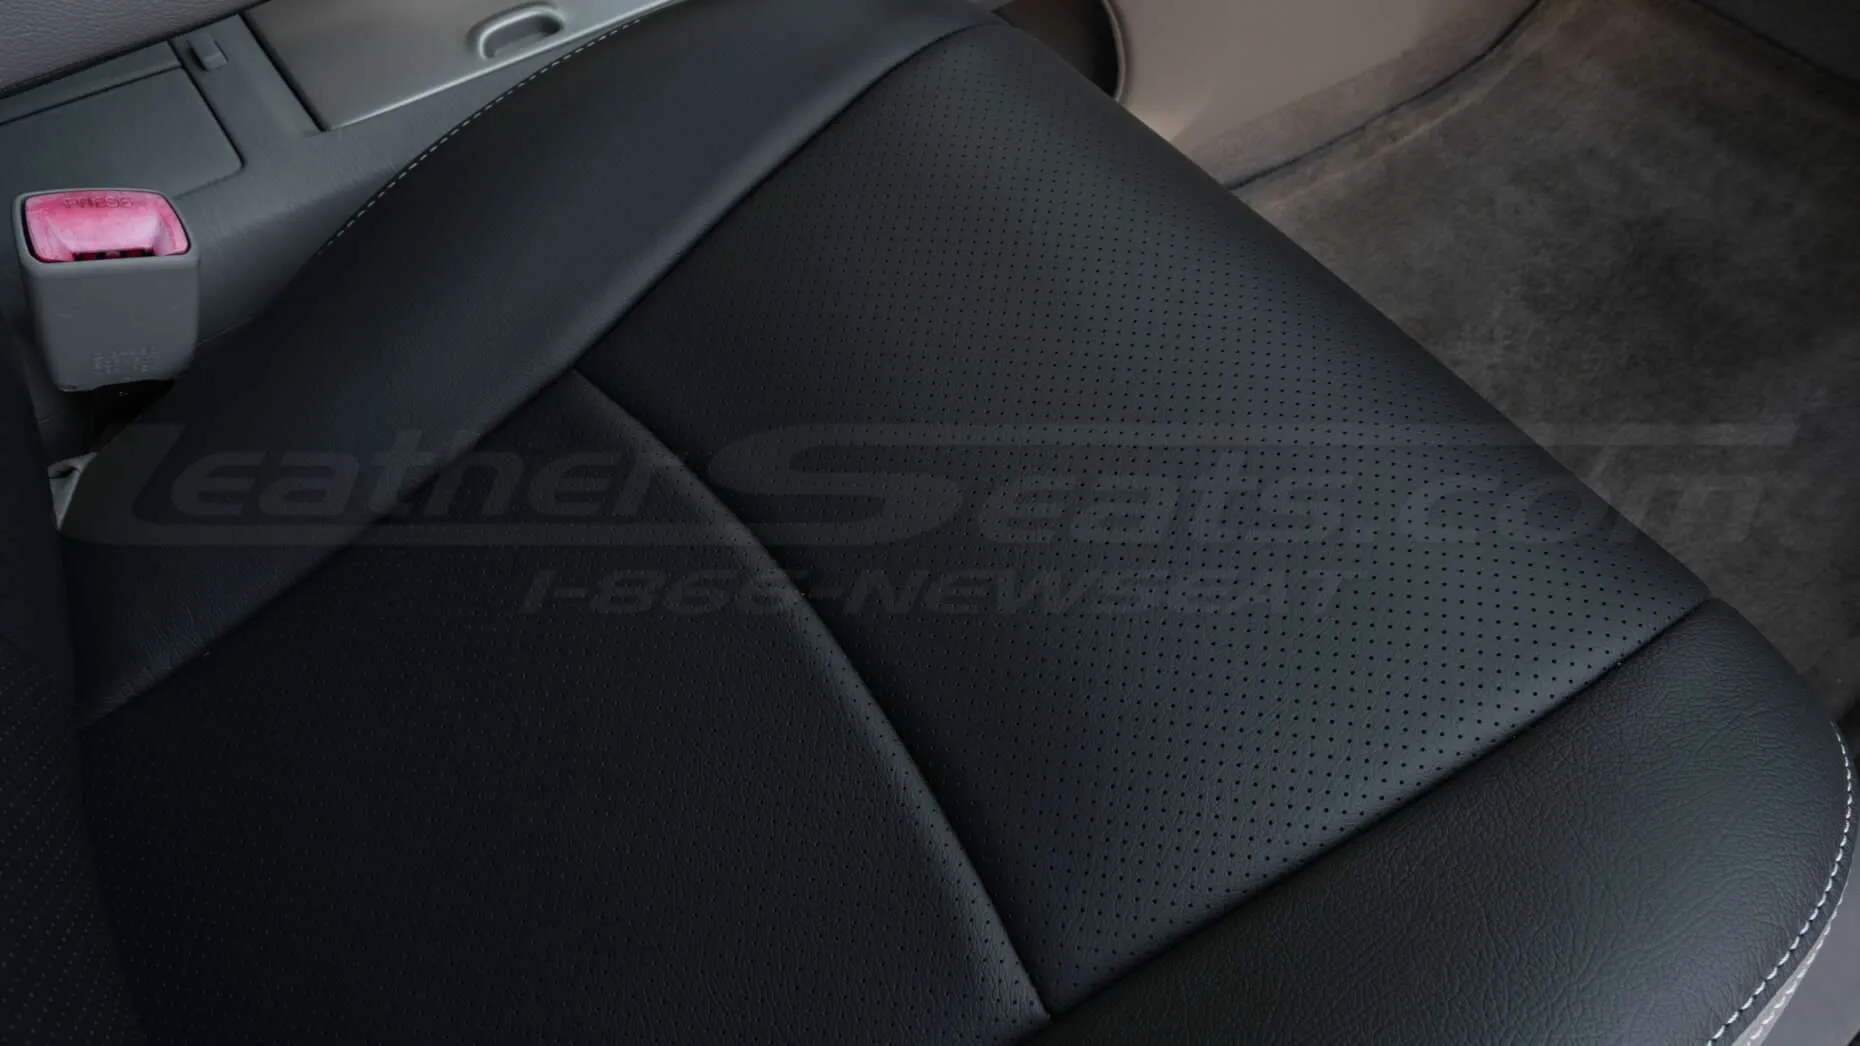 Perforated seat cushion